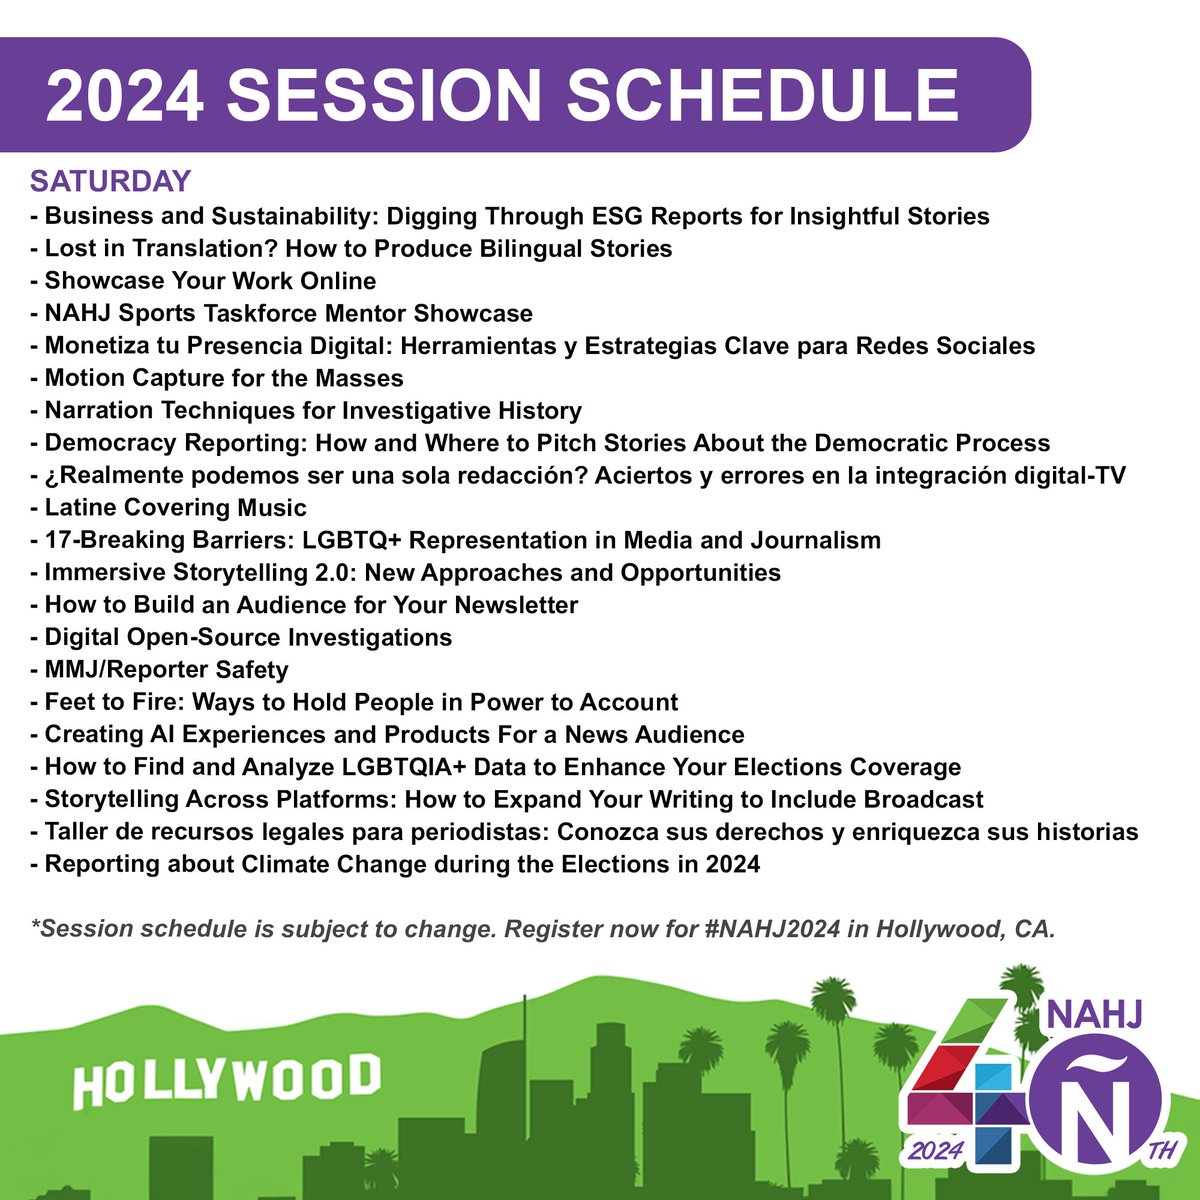 We are delighted to announce the #NAHJ2024 session schedule! 🙌 This year, NAHJ will offer over 80 workshops & training sessions for conference attendees in Hollywood, CA! Don't miss out! See more details on our website. #NAHJ40th 

Register today: nahjconvention.org